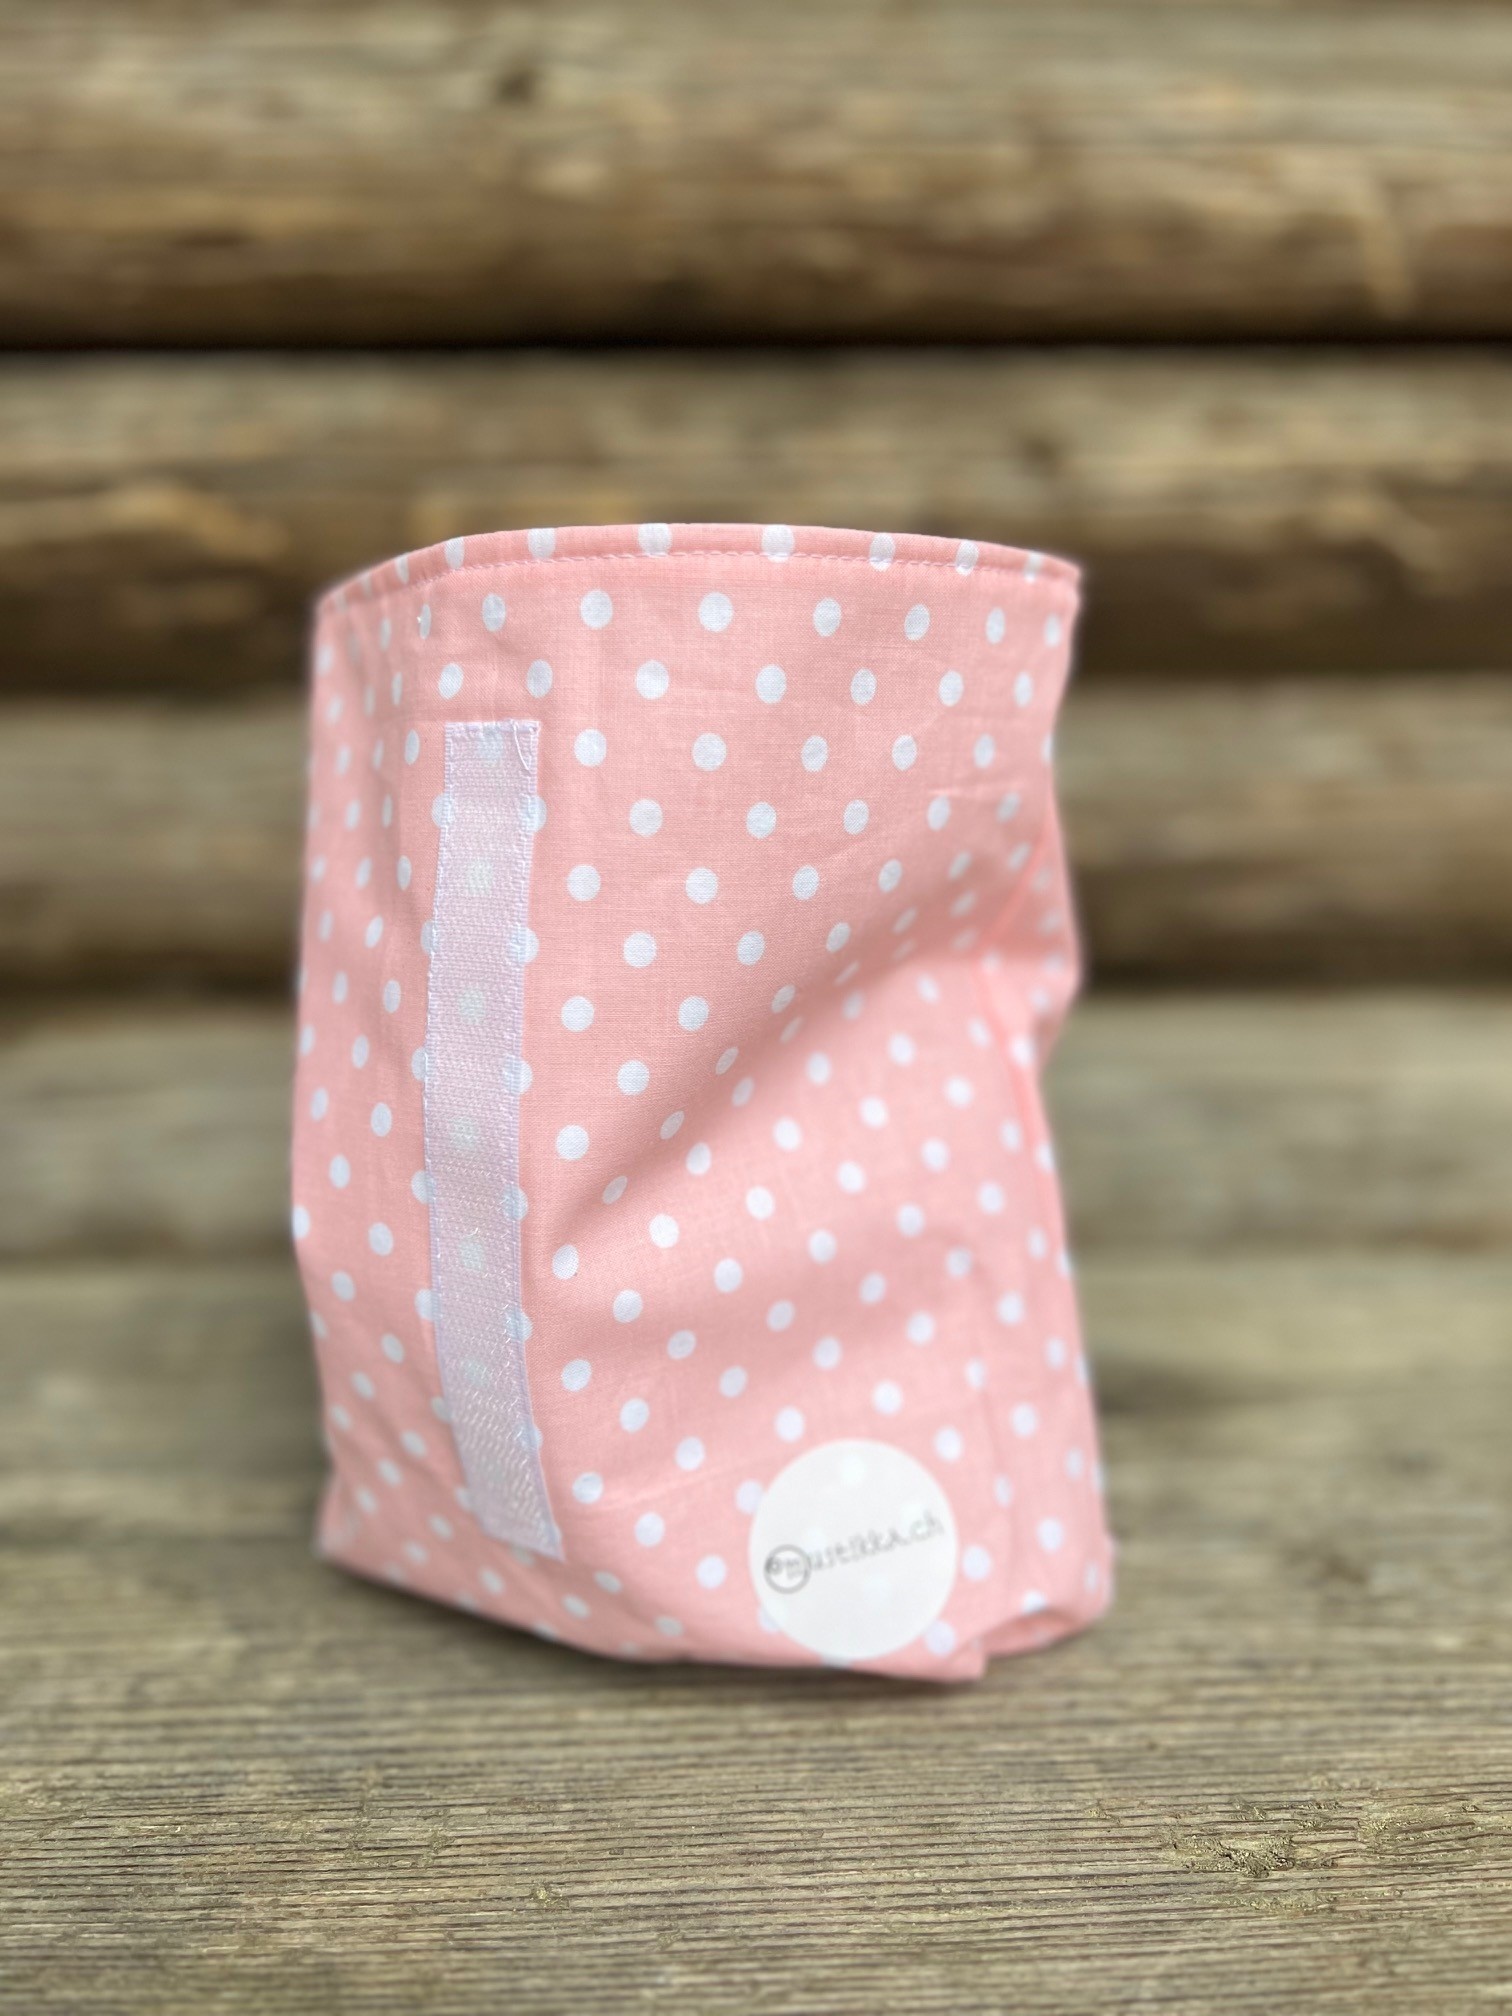 Lunchbag pink - Upcycling Material!